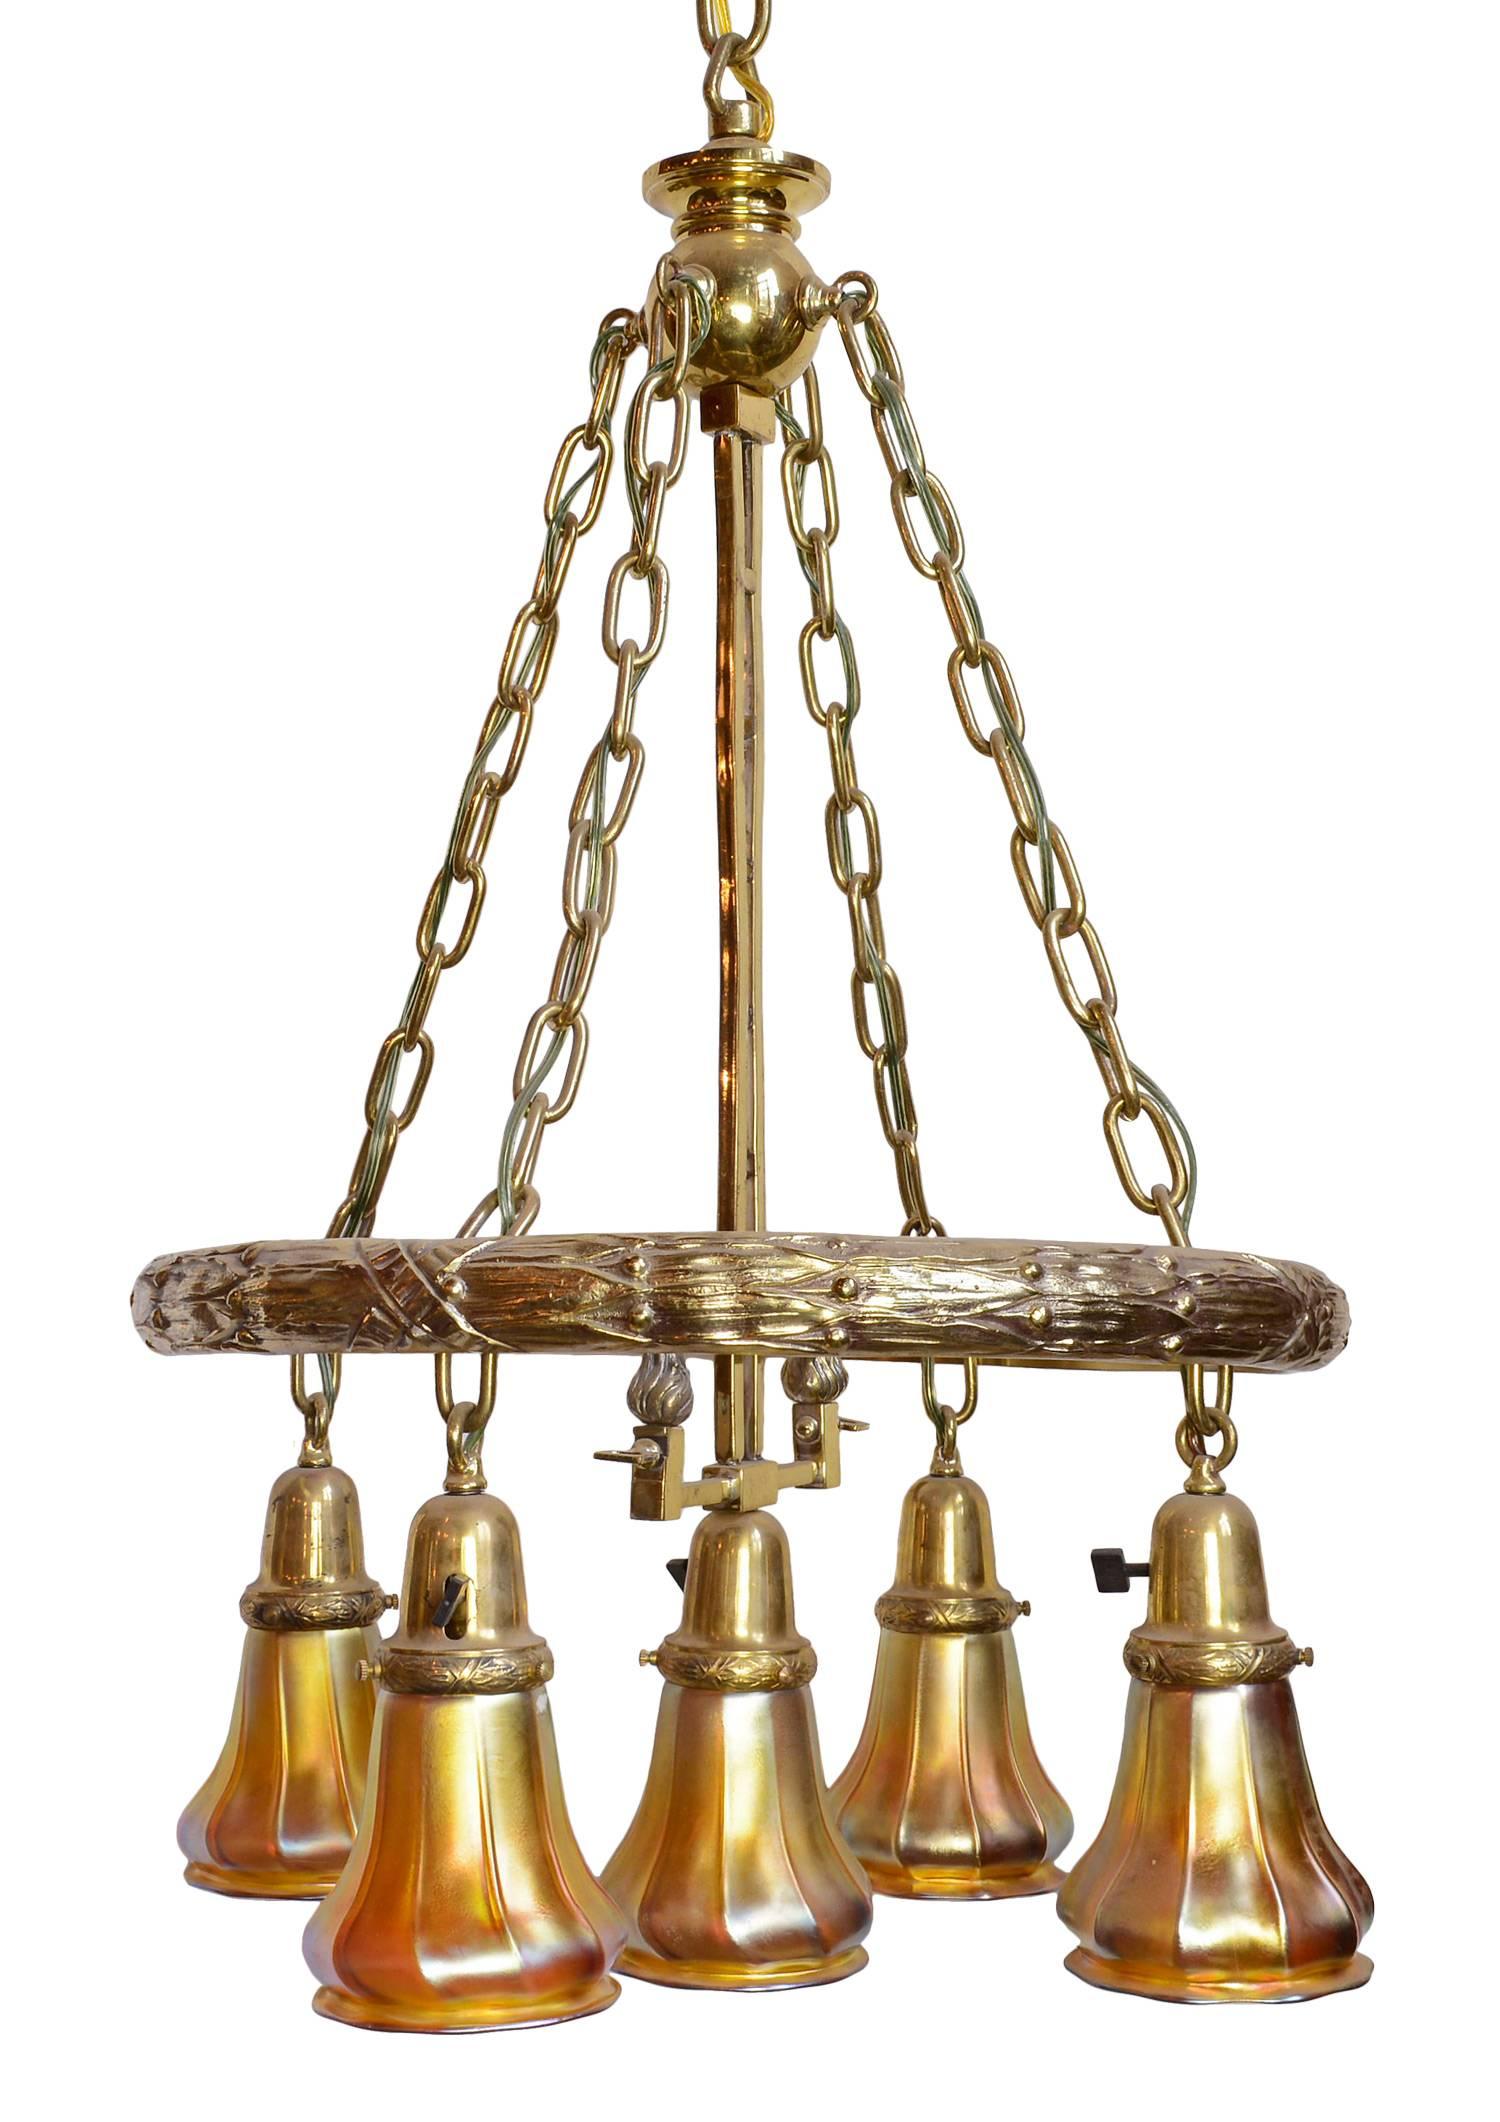 This finely restored and polished chandelier features the laurel leaf pattern that decorates the large brass ring and the bell shaped shade holders.  The center rod is the original gas/electric mechanism and the five aurene shades are signed